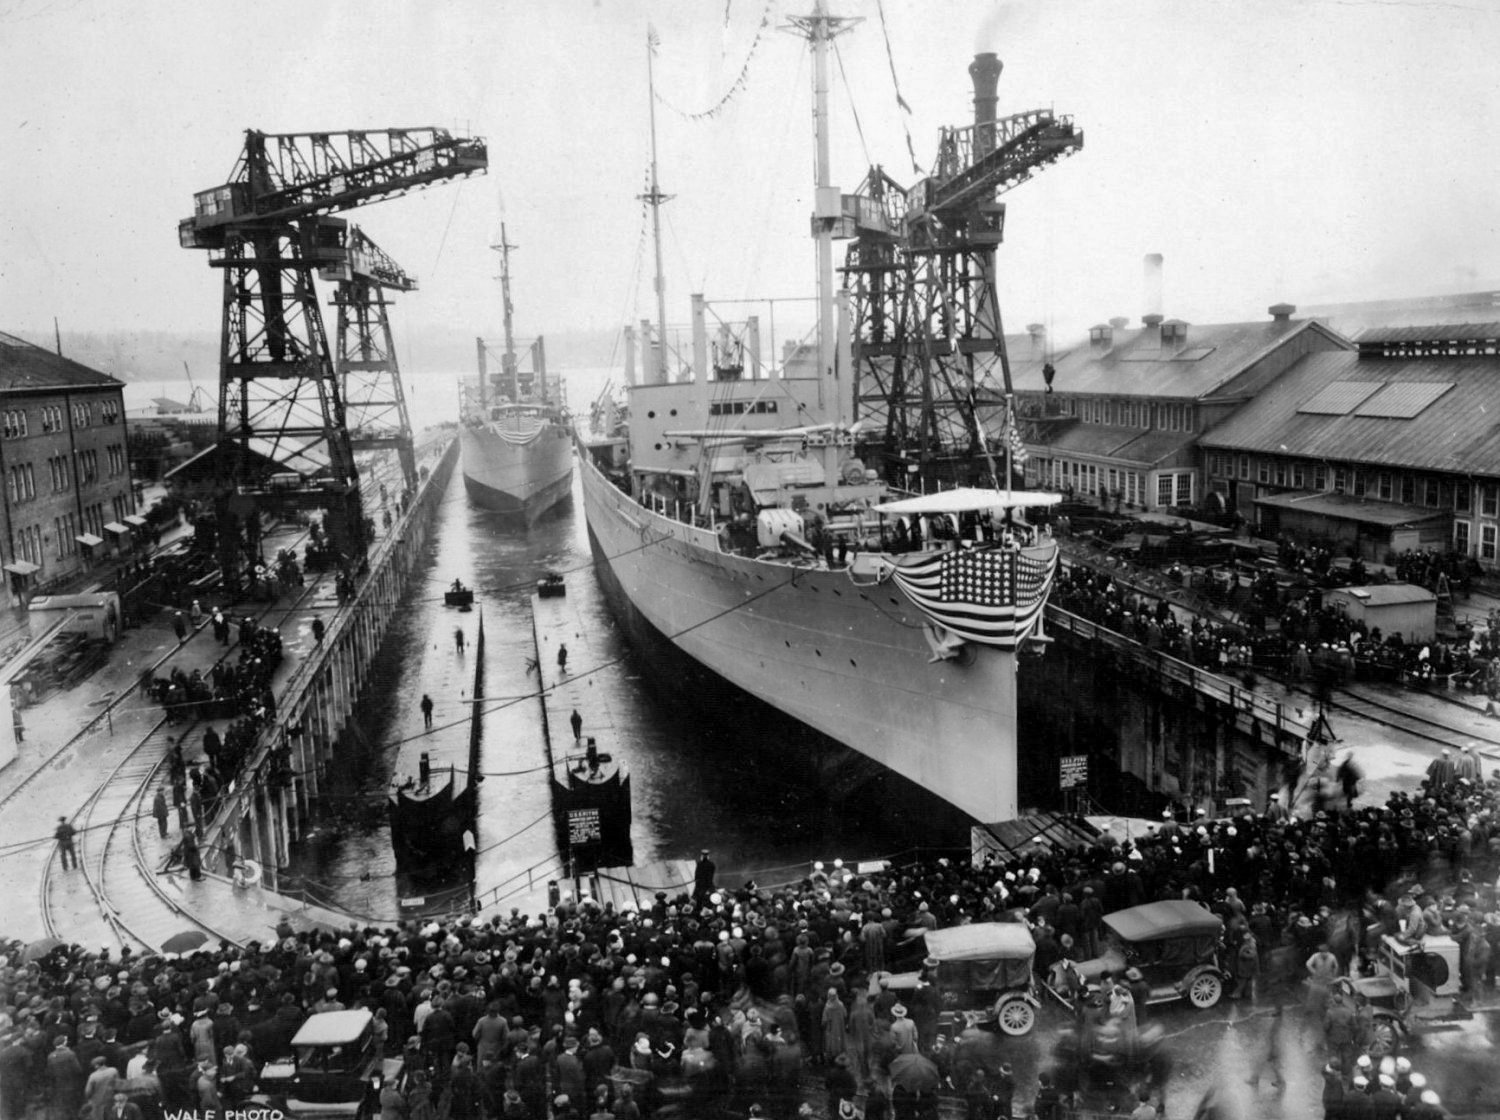 After ammunition ships Pyro and Nitro were christened at the Puget Sound Naval Shipyard, Bremerton, Washington, United States, the drydock was flooded for their launching, 16 Dec 1919.